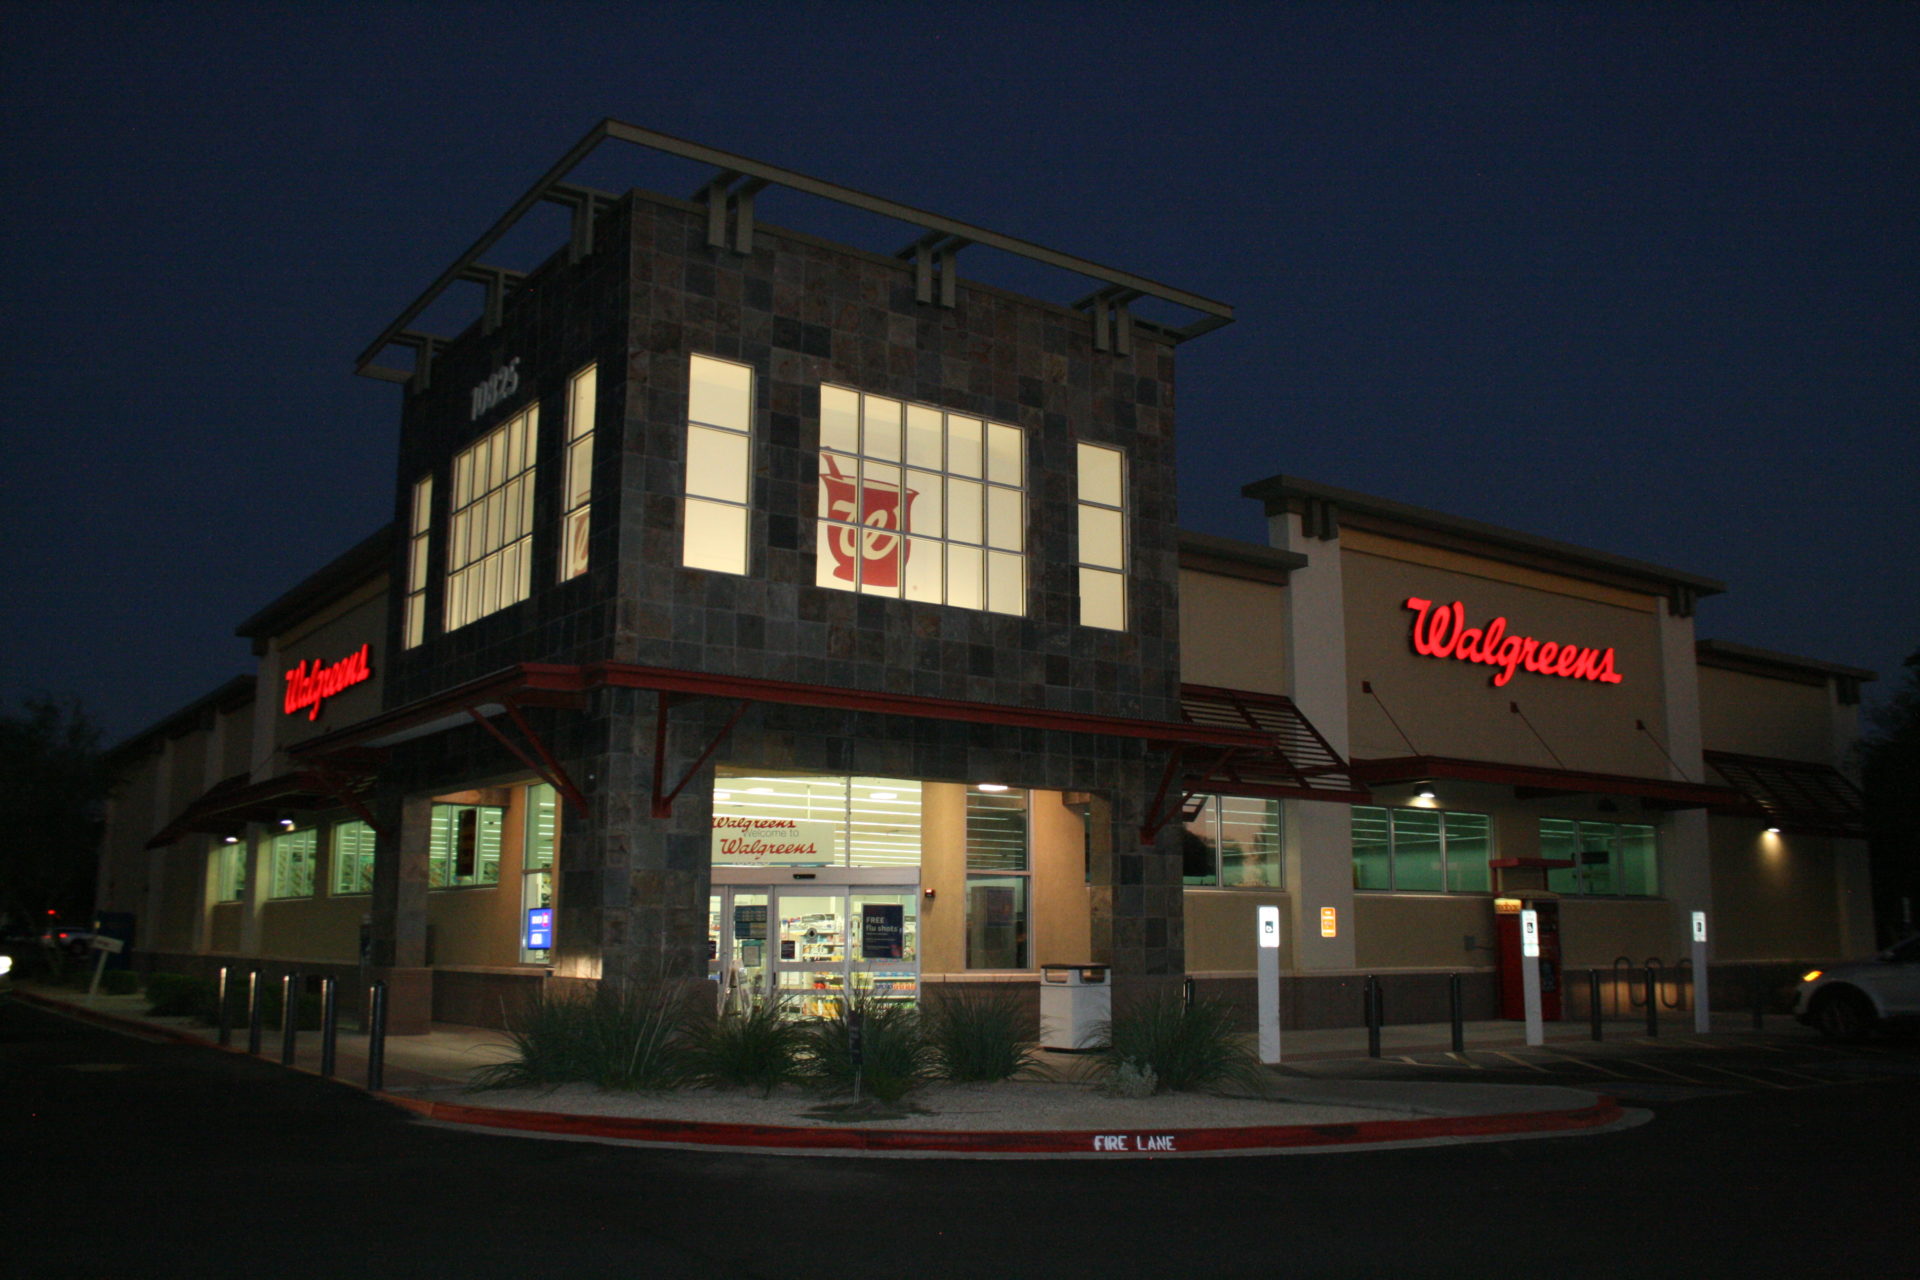 A large building with a red sign on the front.